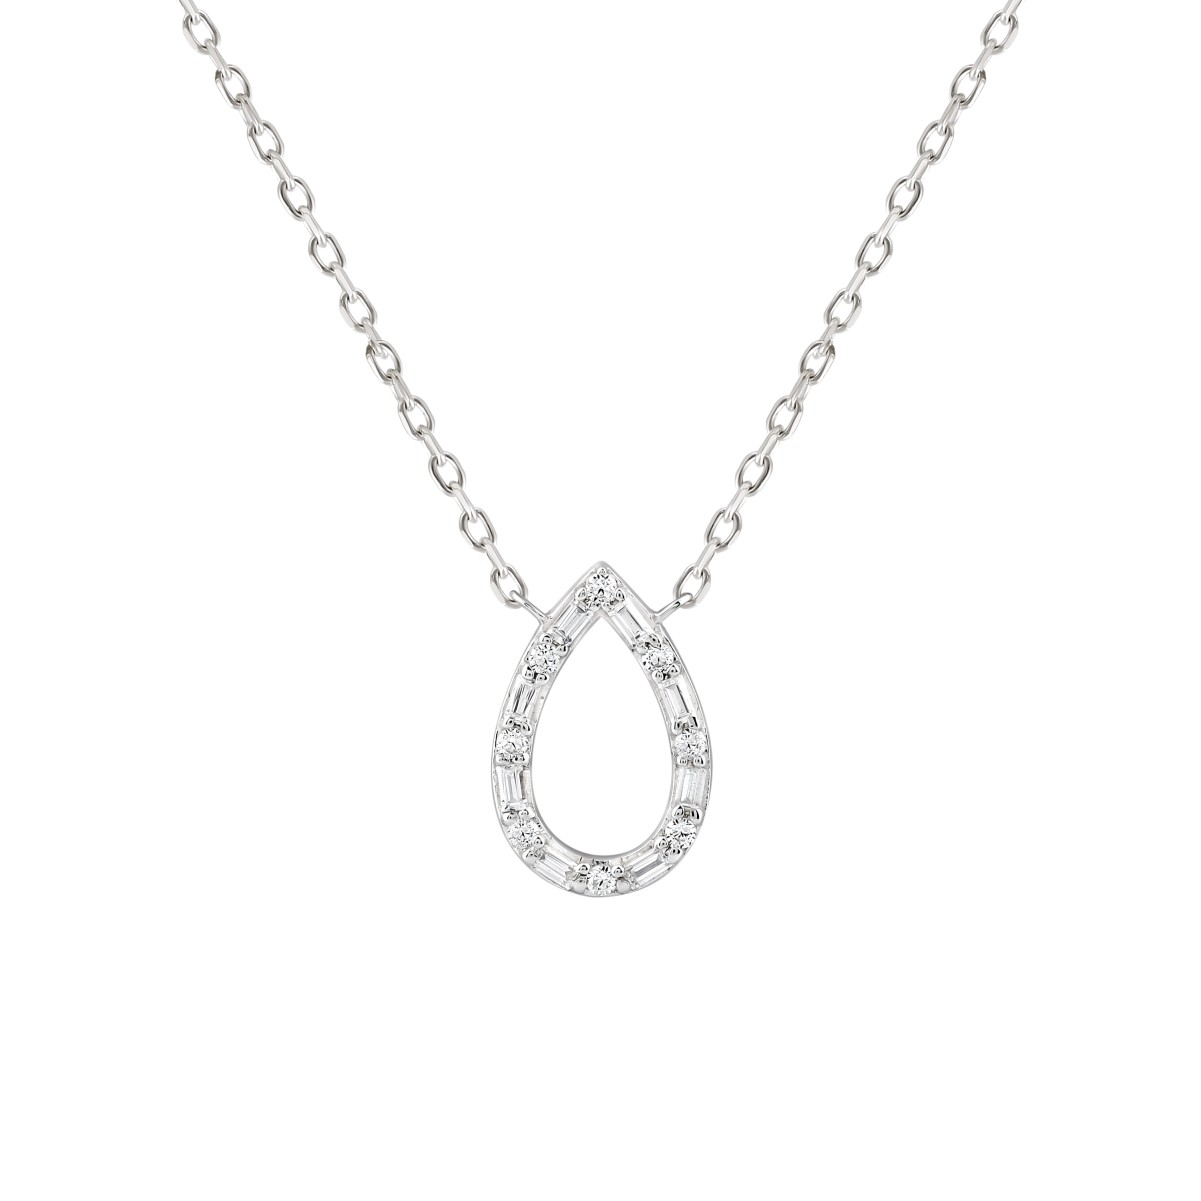 18K WHITE  GOLD 1/6CT ROUND/BAGUETTE DIAMOND LADIES PENDANT WITH CHAIN  